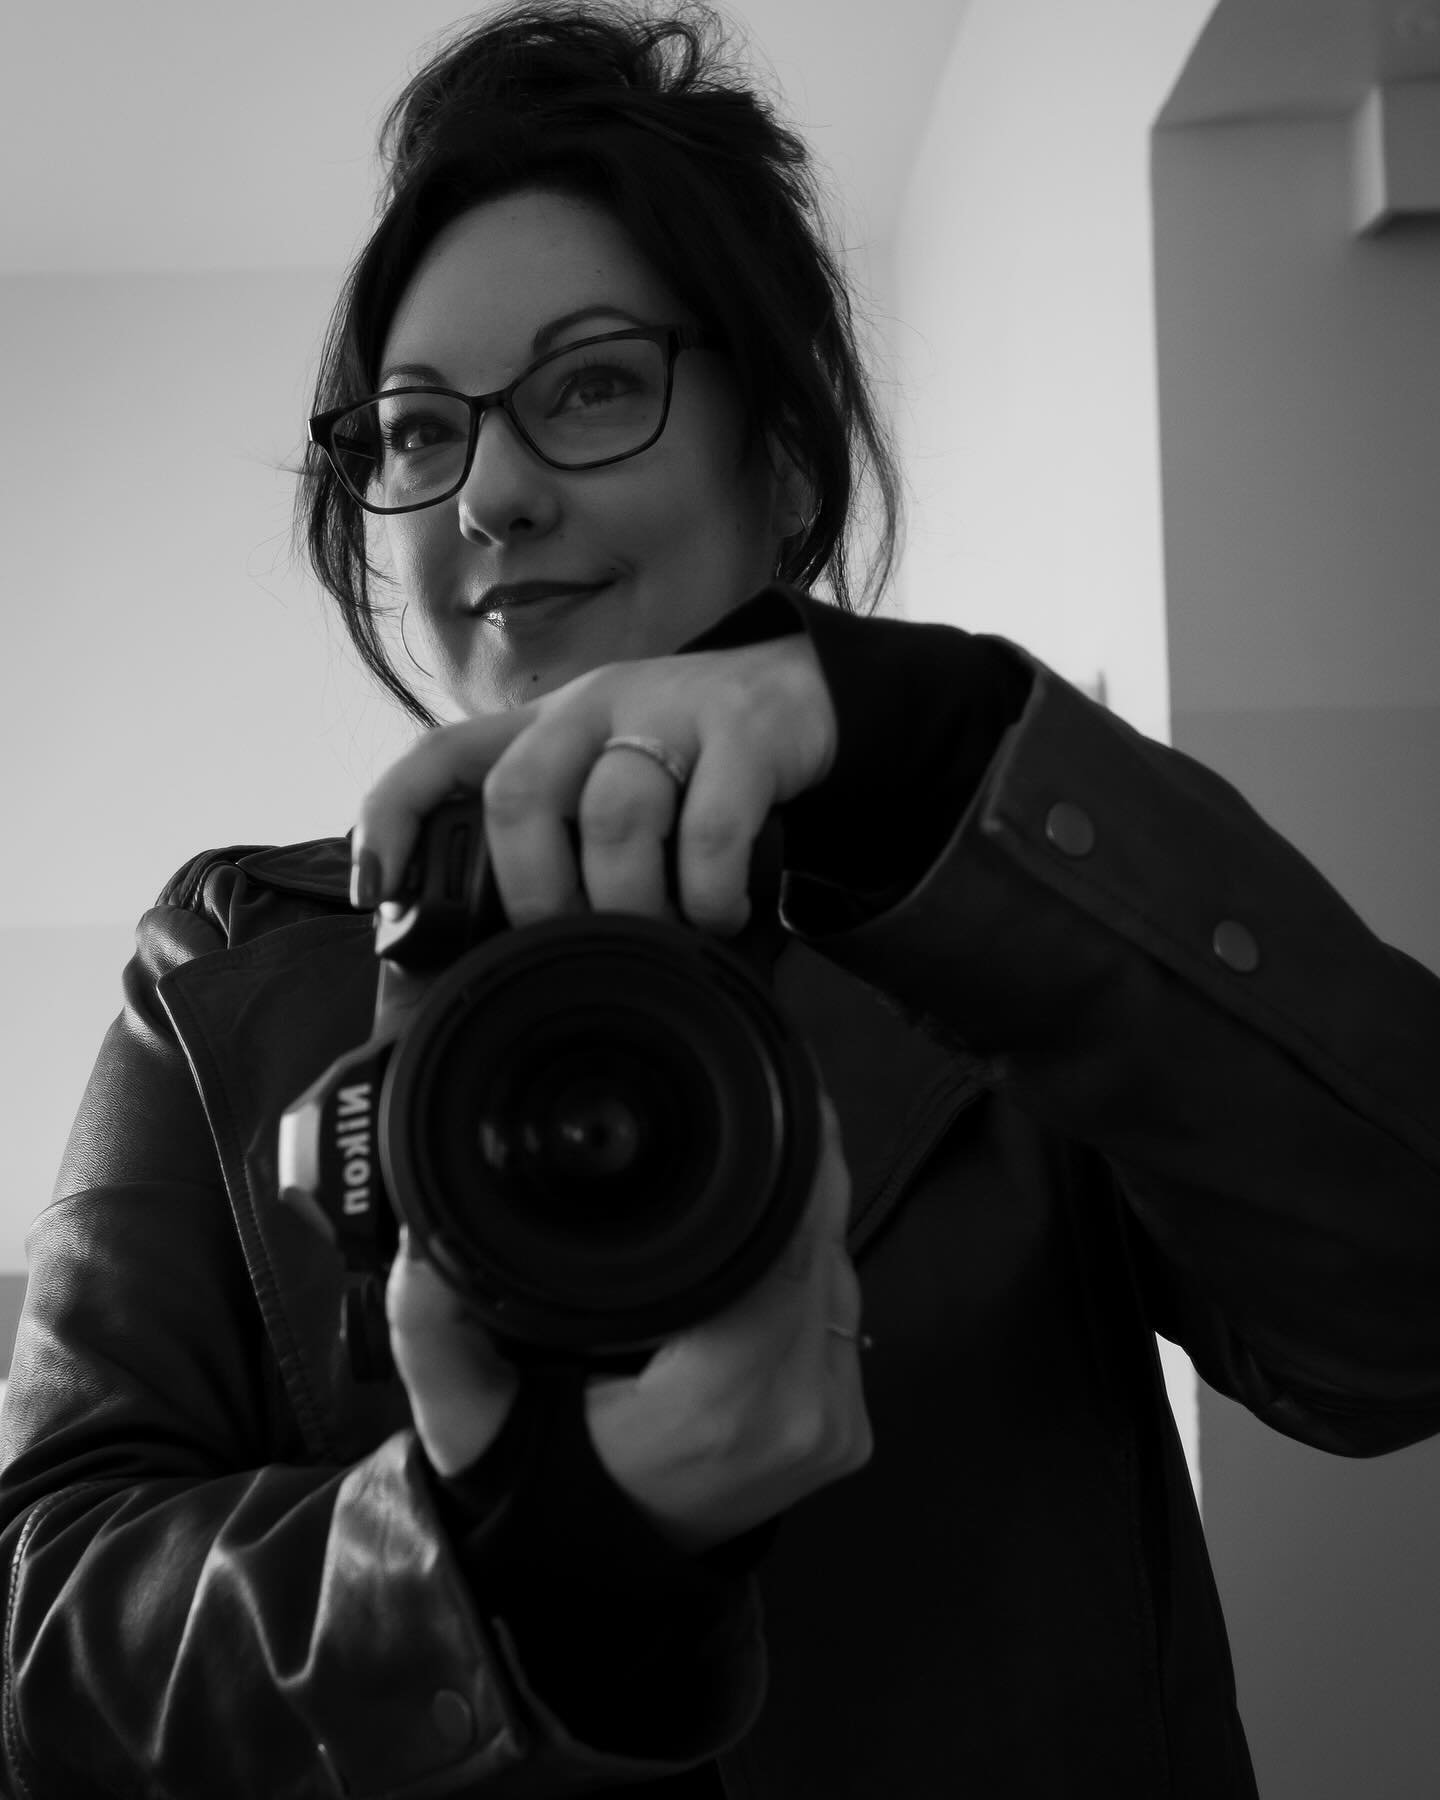 Self Portrait 📸 
Much more comfortable behind the camera, mostly because I&rsquo;m not super confident and I prefer to hide. The reality of my life right now is that I am working very, very hard, running fast toward something I can&rsquo;t even see.